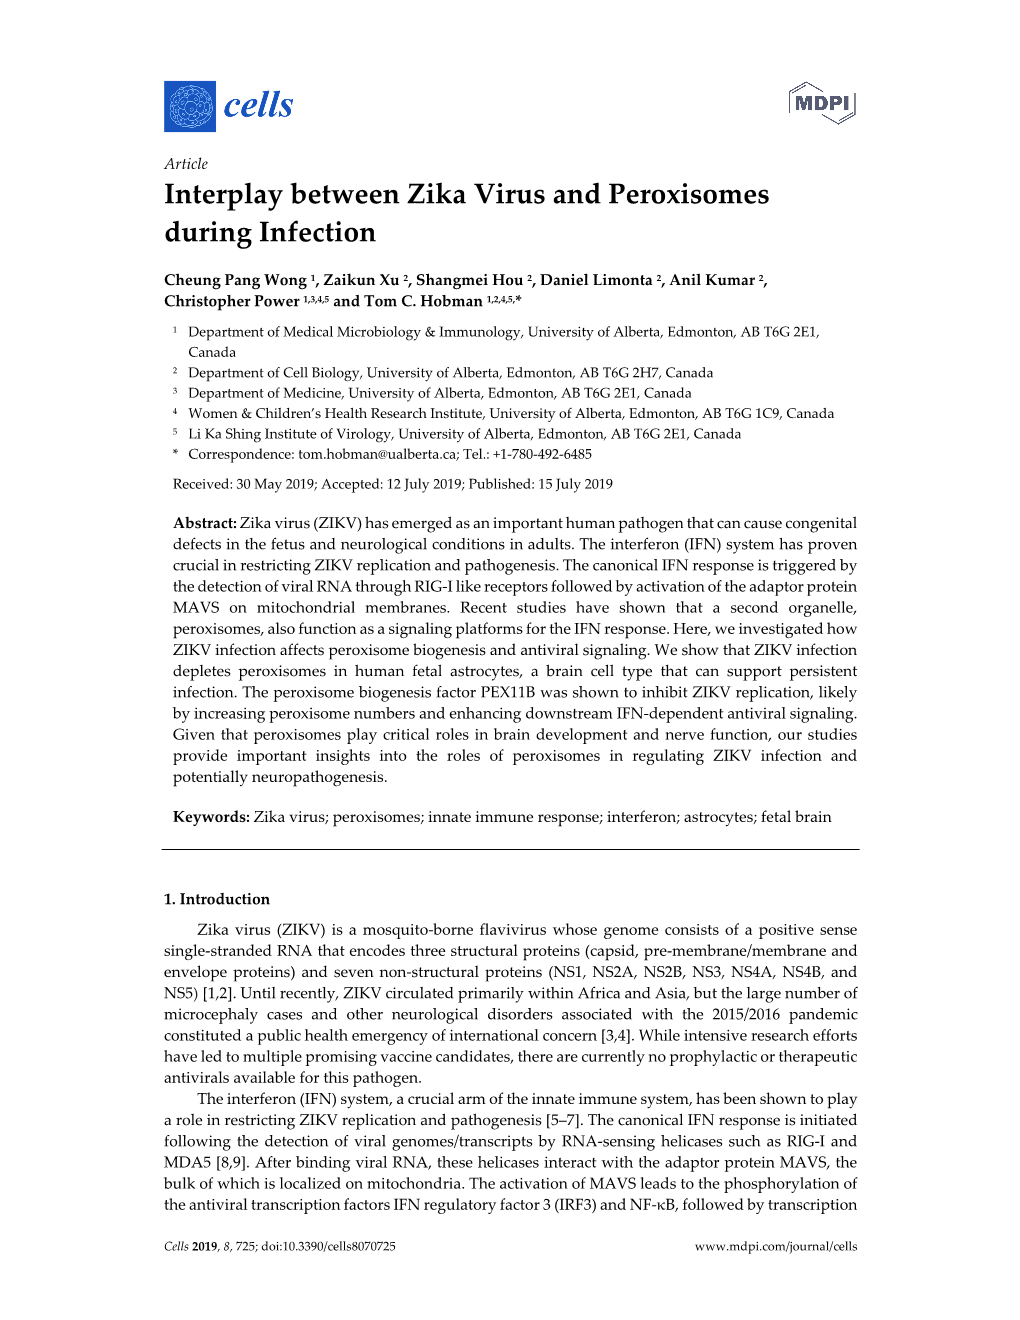 Interplay Between Zika Virus and Peroxisomes During Infection